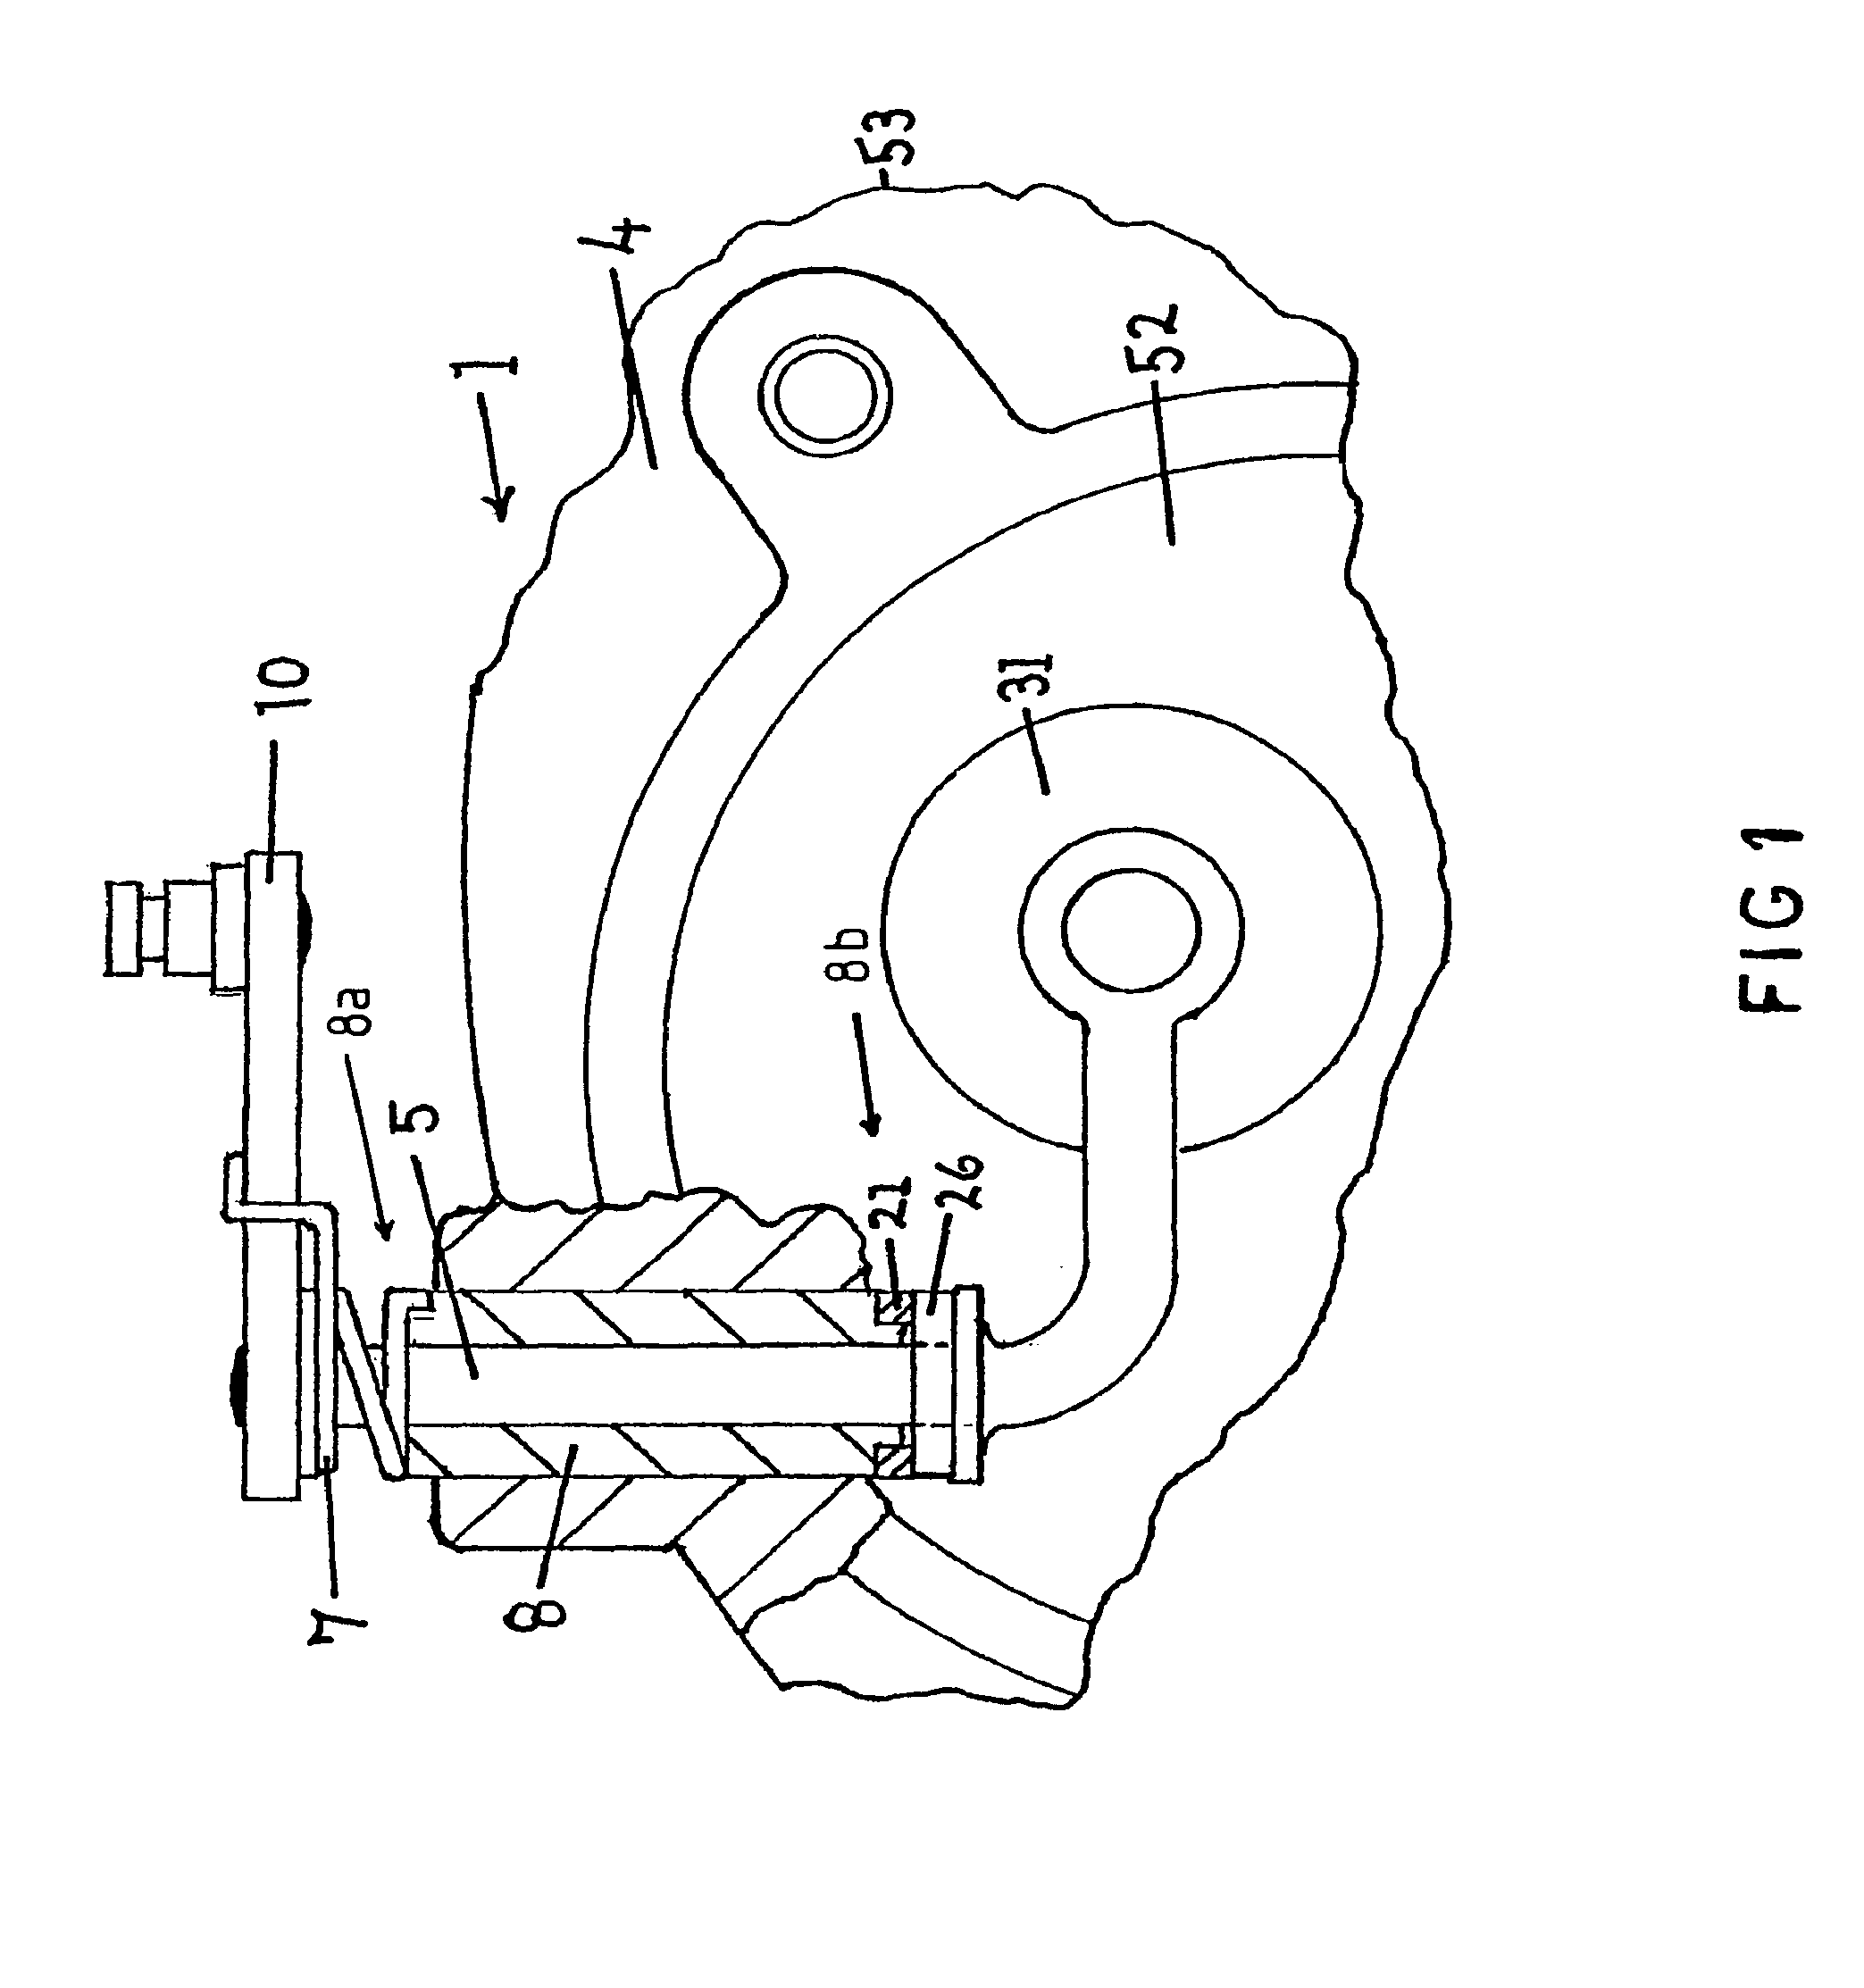 Turbocharger apparatus having an exhaust gas sealing system for preventing gas leakage from the turbocharger apparatus